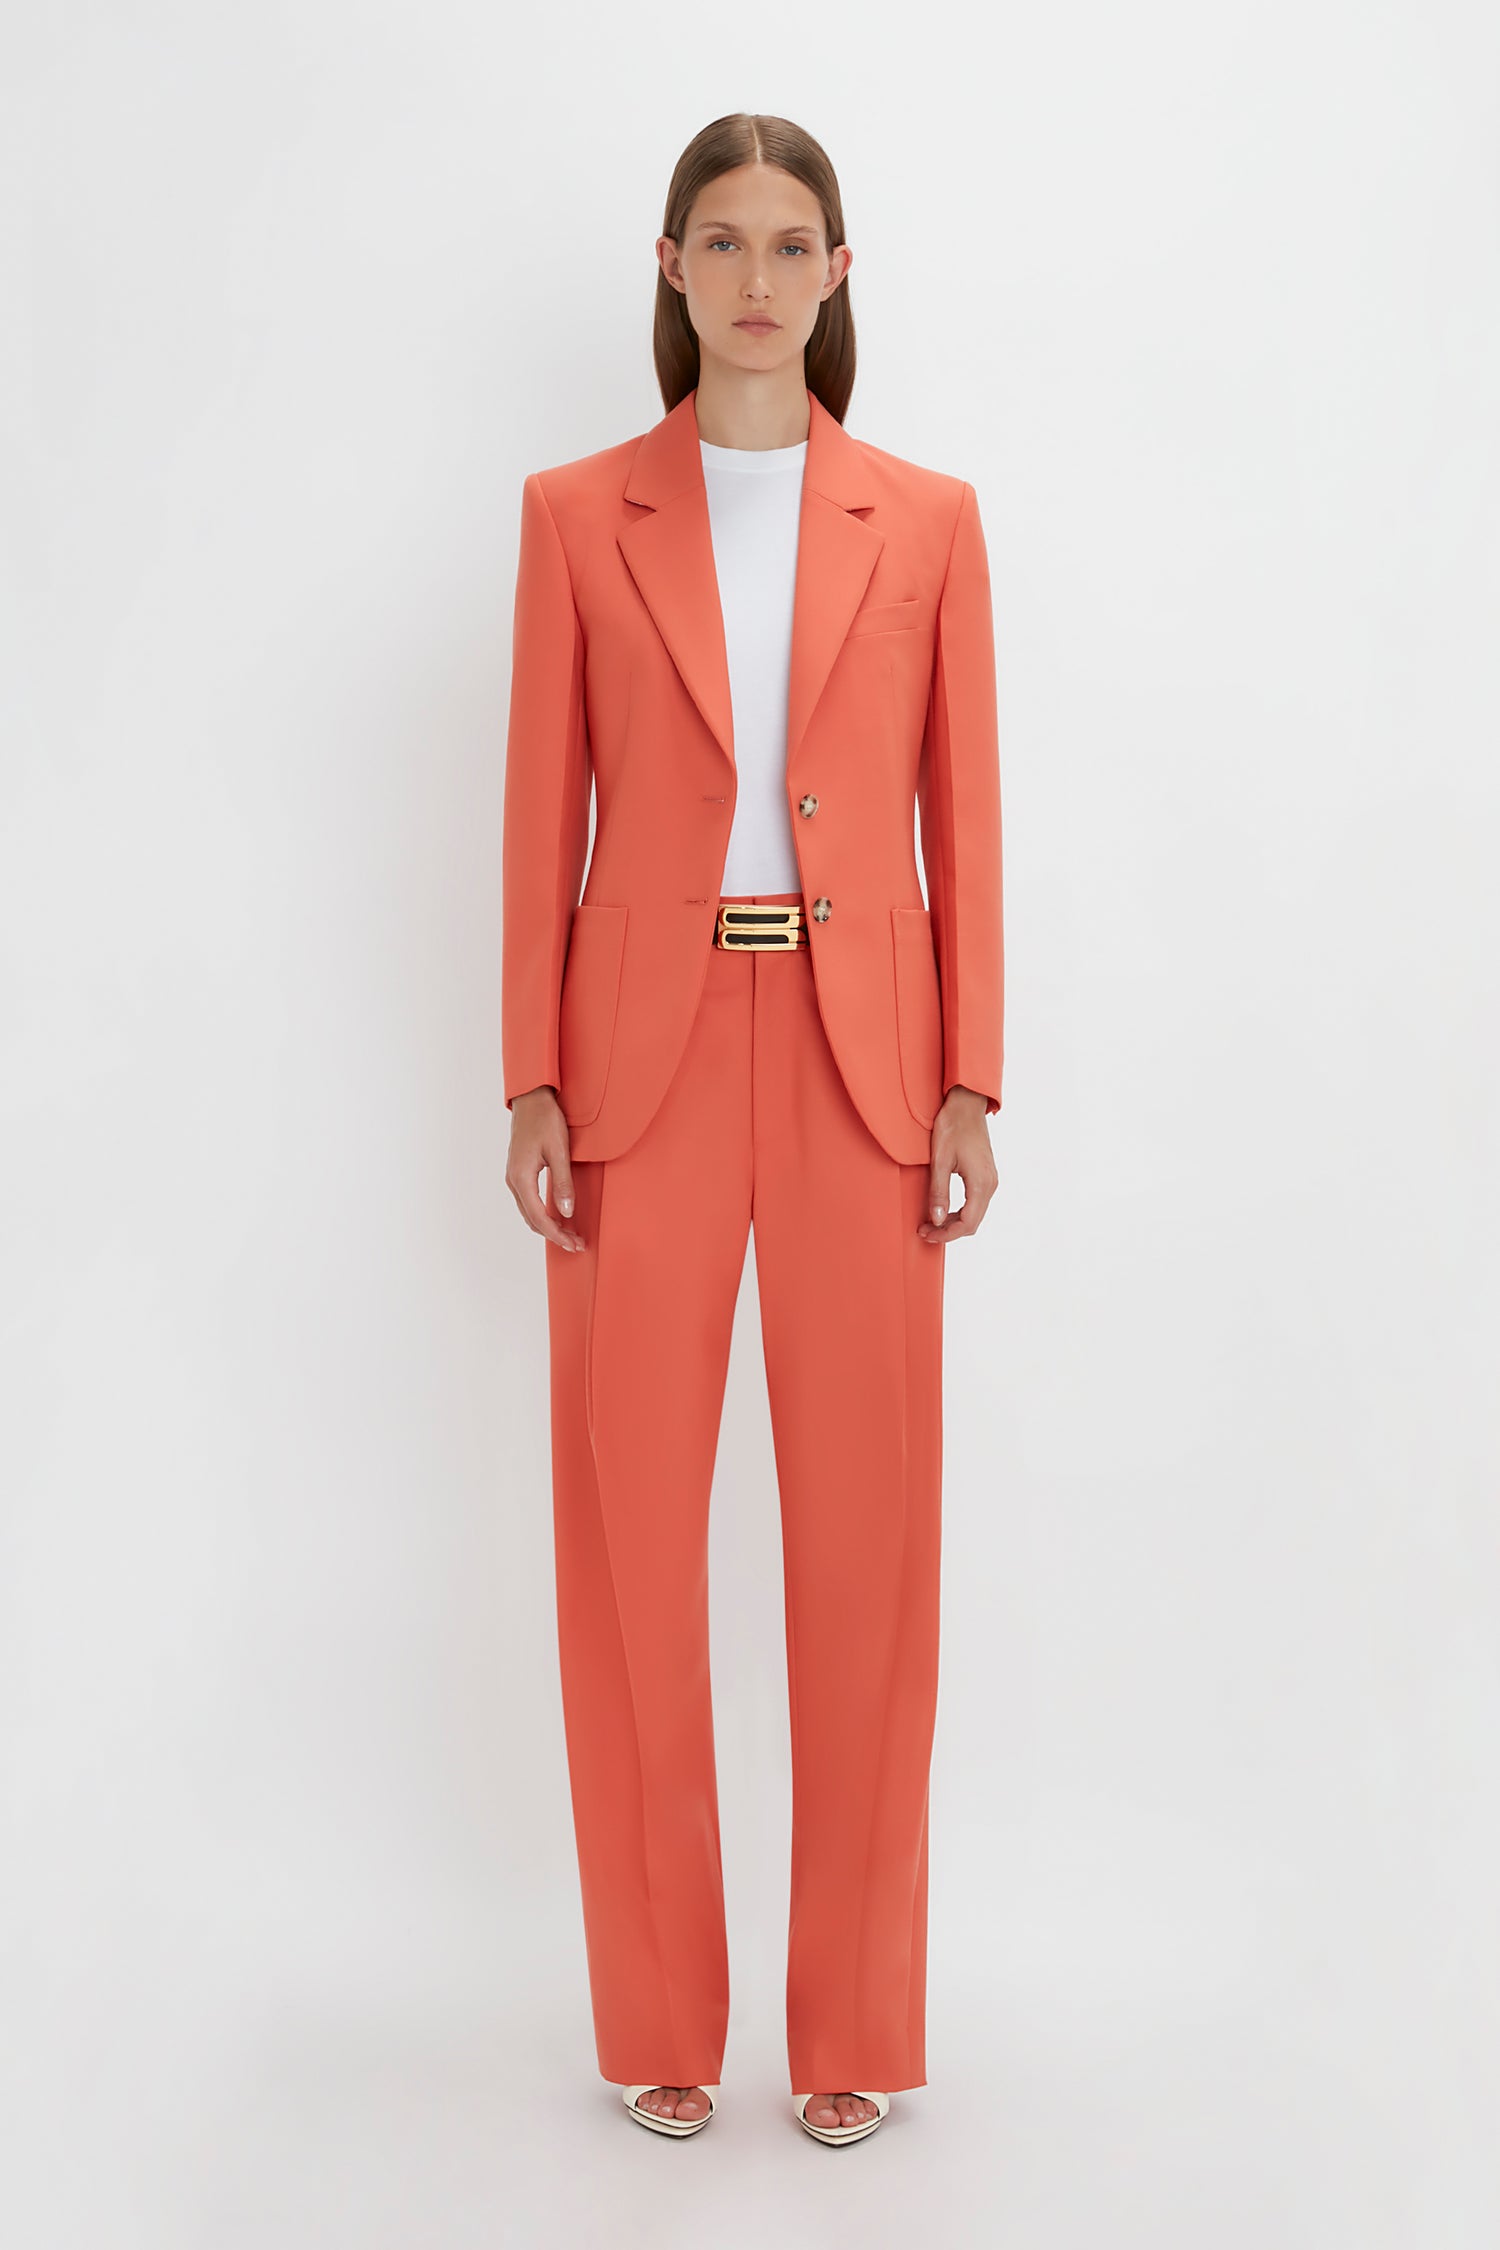 A woman in a bright Patch Pocket Jacket in Papaya by Victoria Beckham with a single-breasted jacket and a black belt, standing against a plain white background.